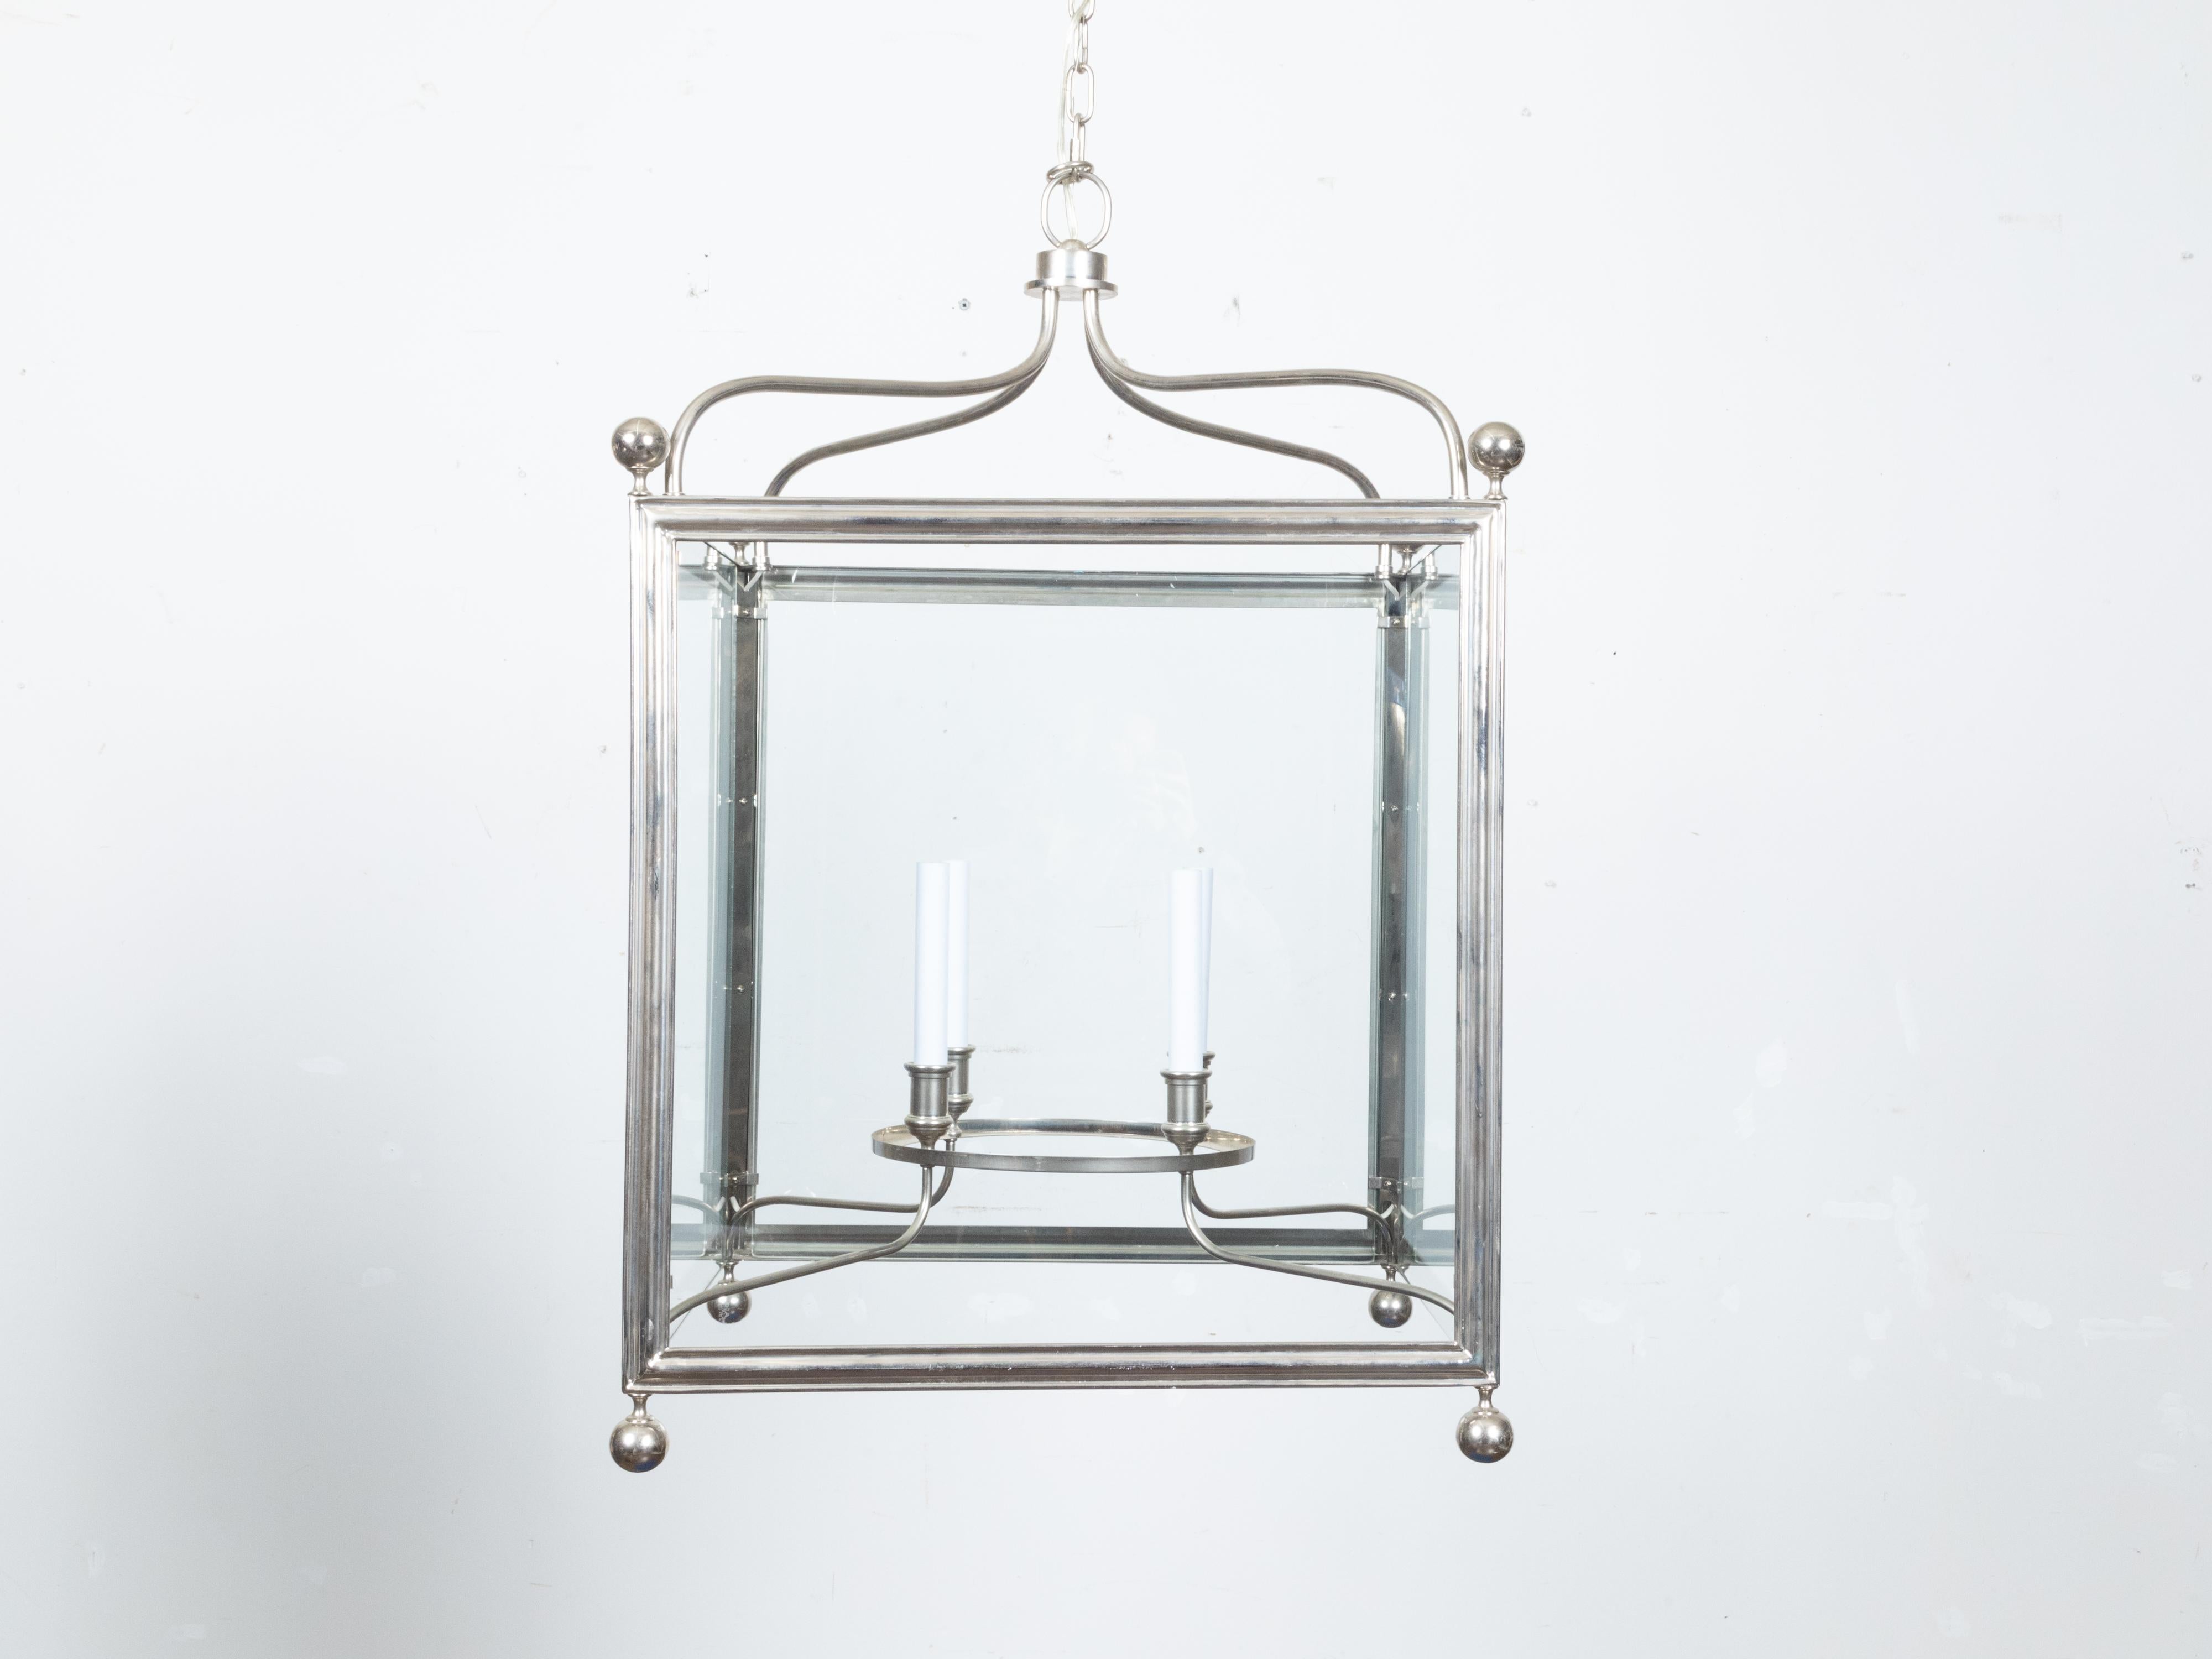 An English Midcentury metal four-light lantern with silver color, scrolling accents and glass panels. Introduce an elegant statement to your interiors with this English Midcentury metal four-light lantern. Crafted circa mid-20th century, this